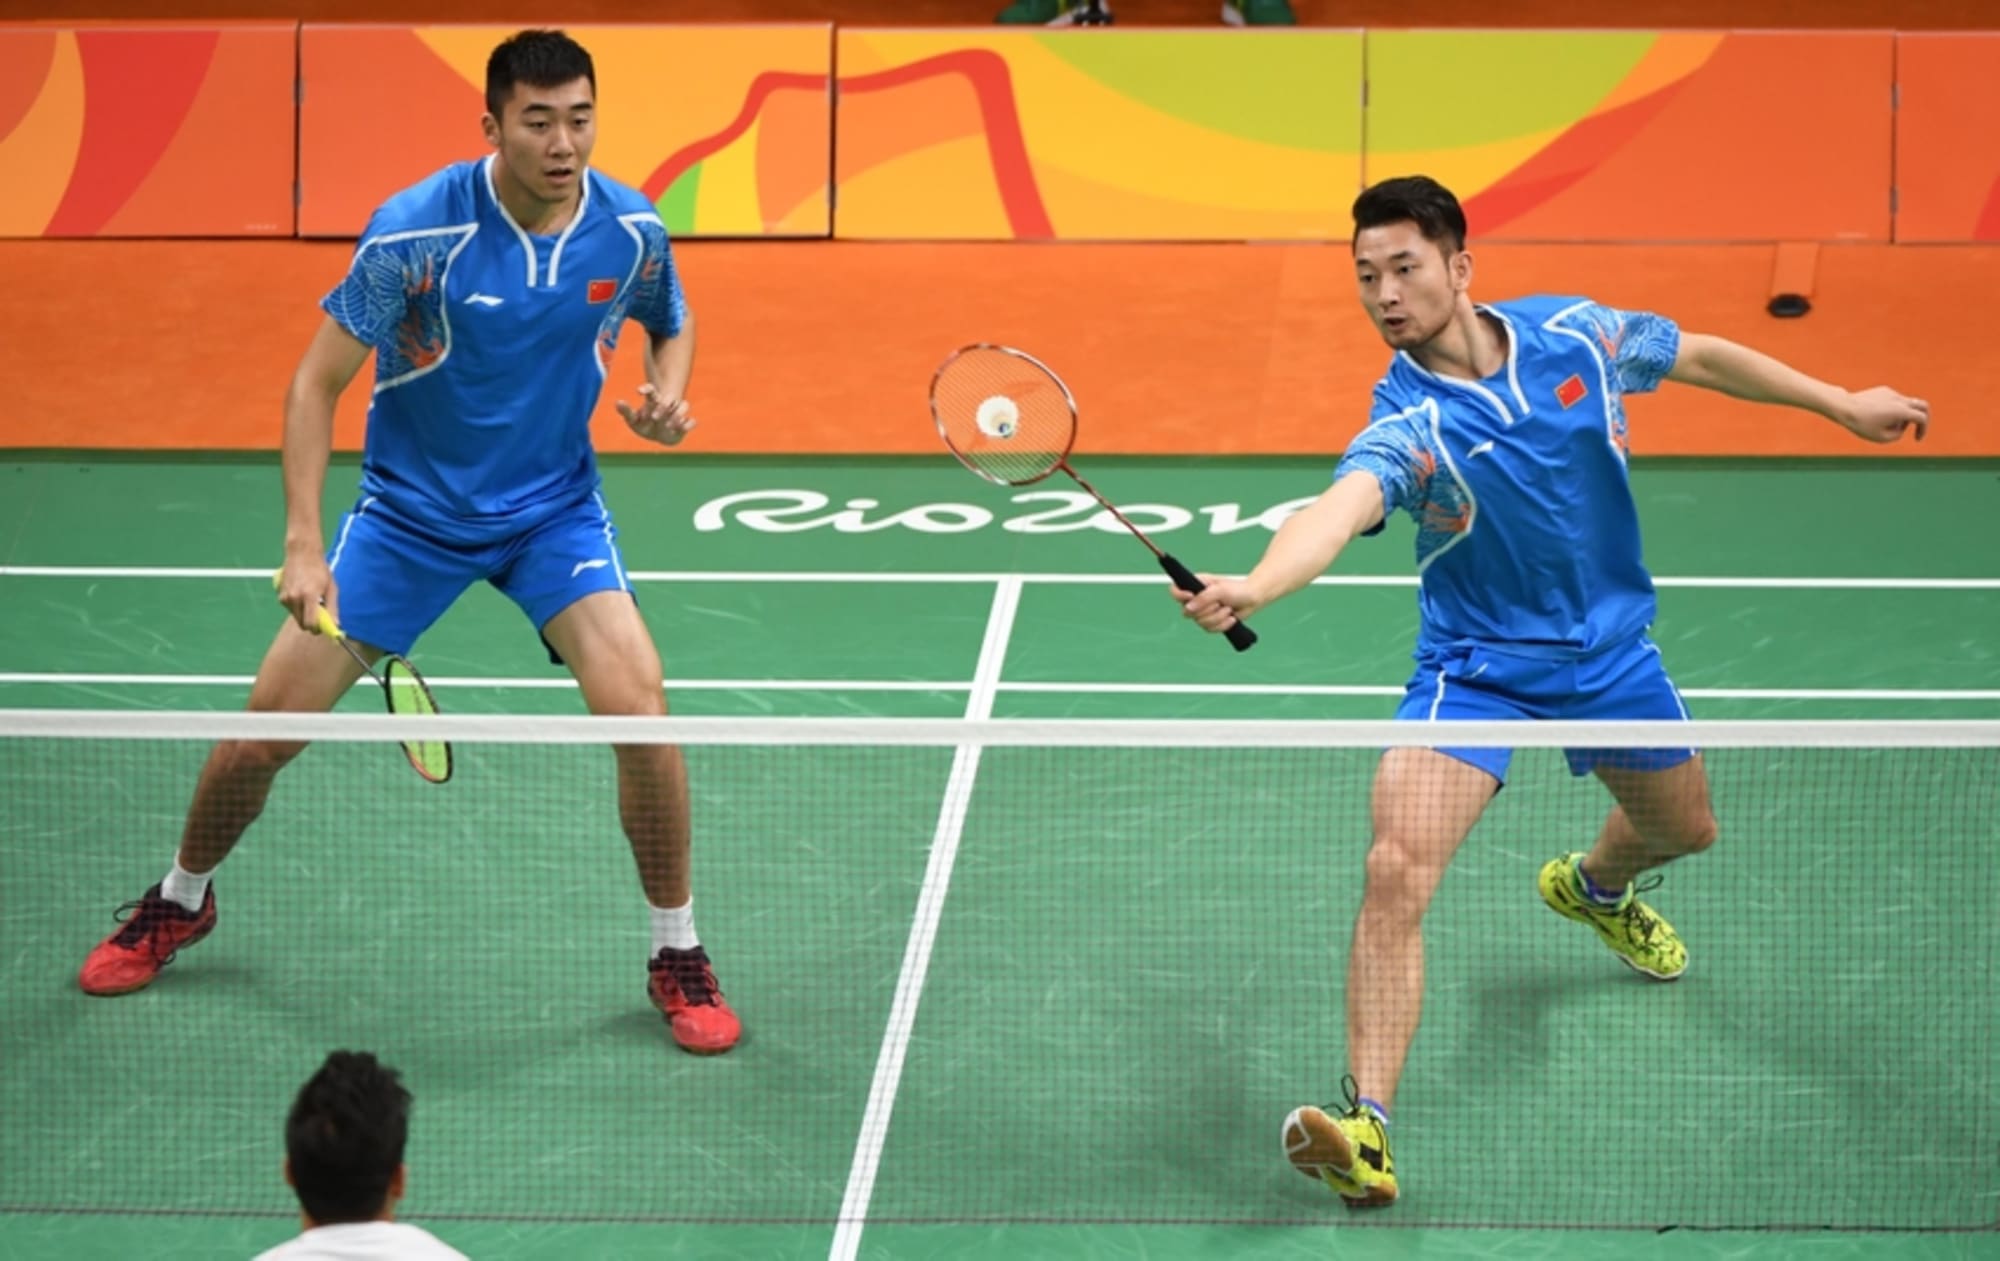 Olympic badminton live stream: Watch online - August 13